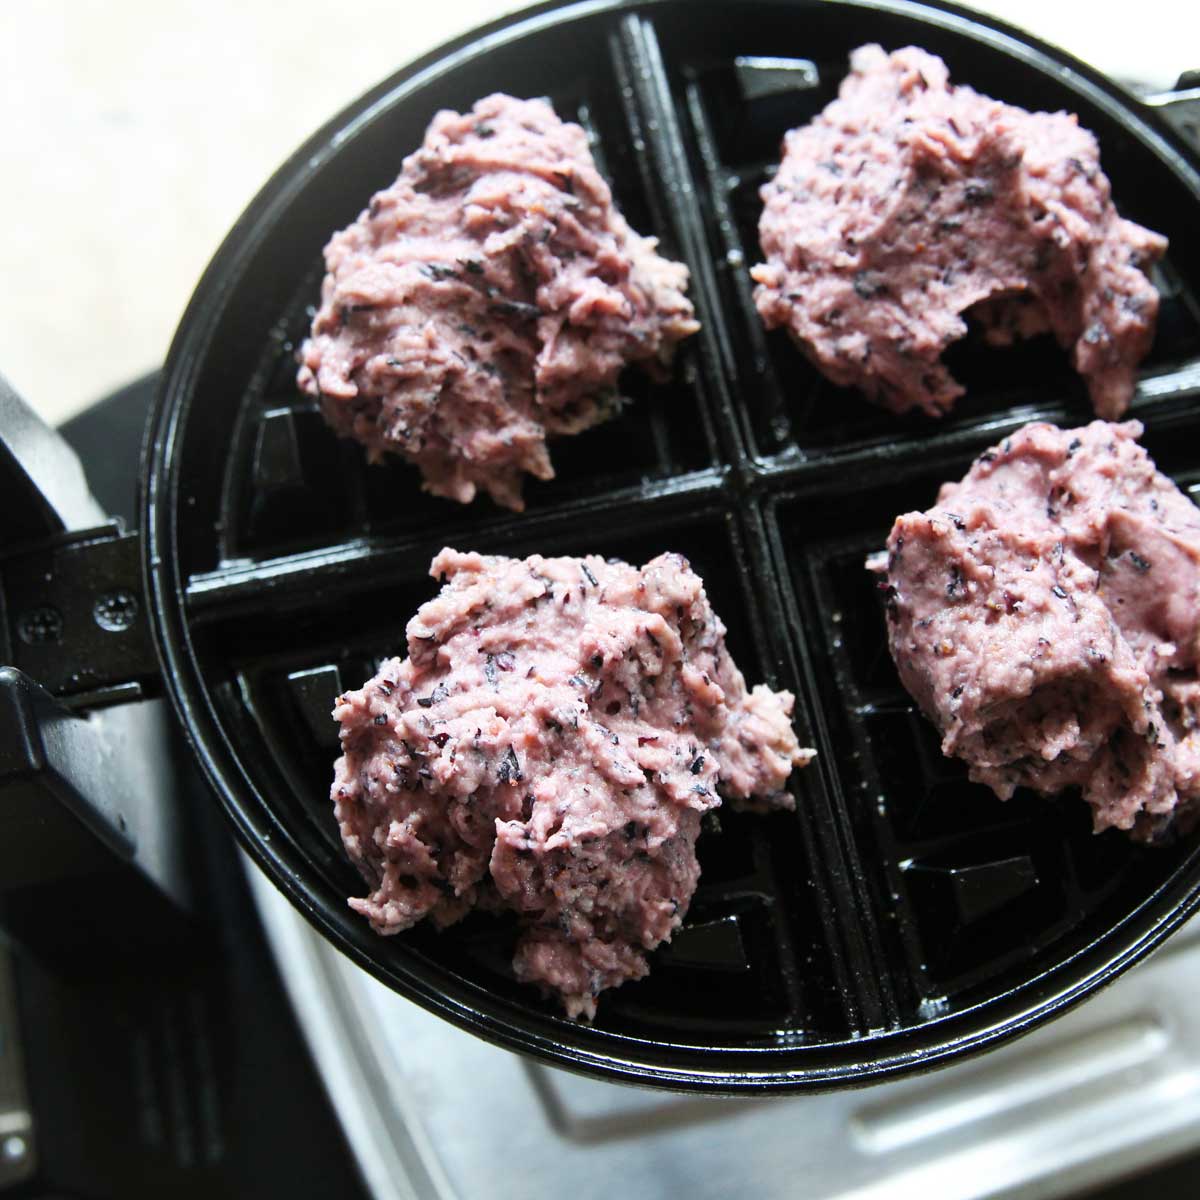 Making Homemade Blueberry Mochi Waffles from Scratch (Gluten-Free, Vegan) - Blueberry Mochi Waffles